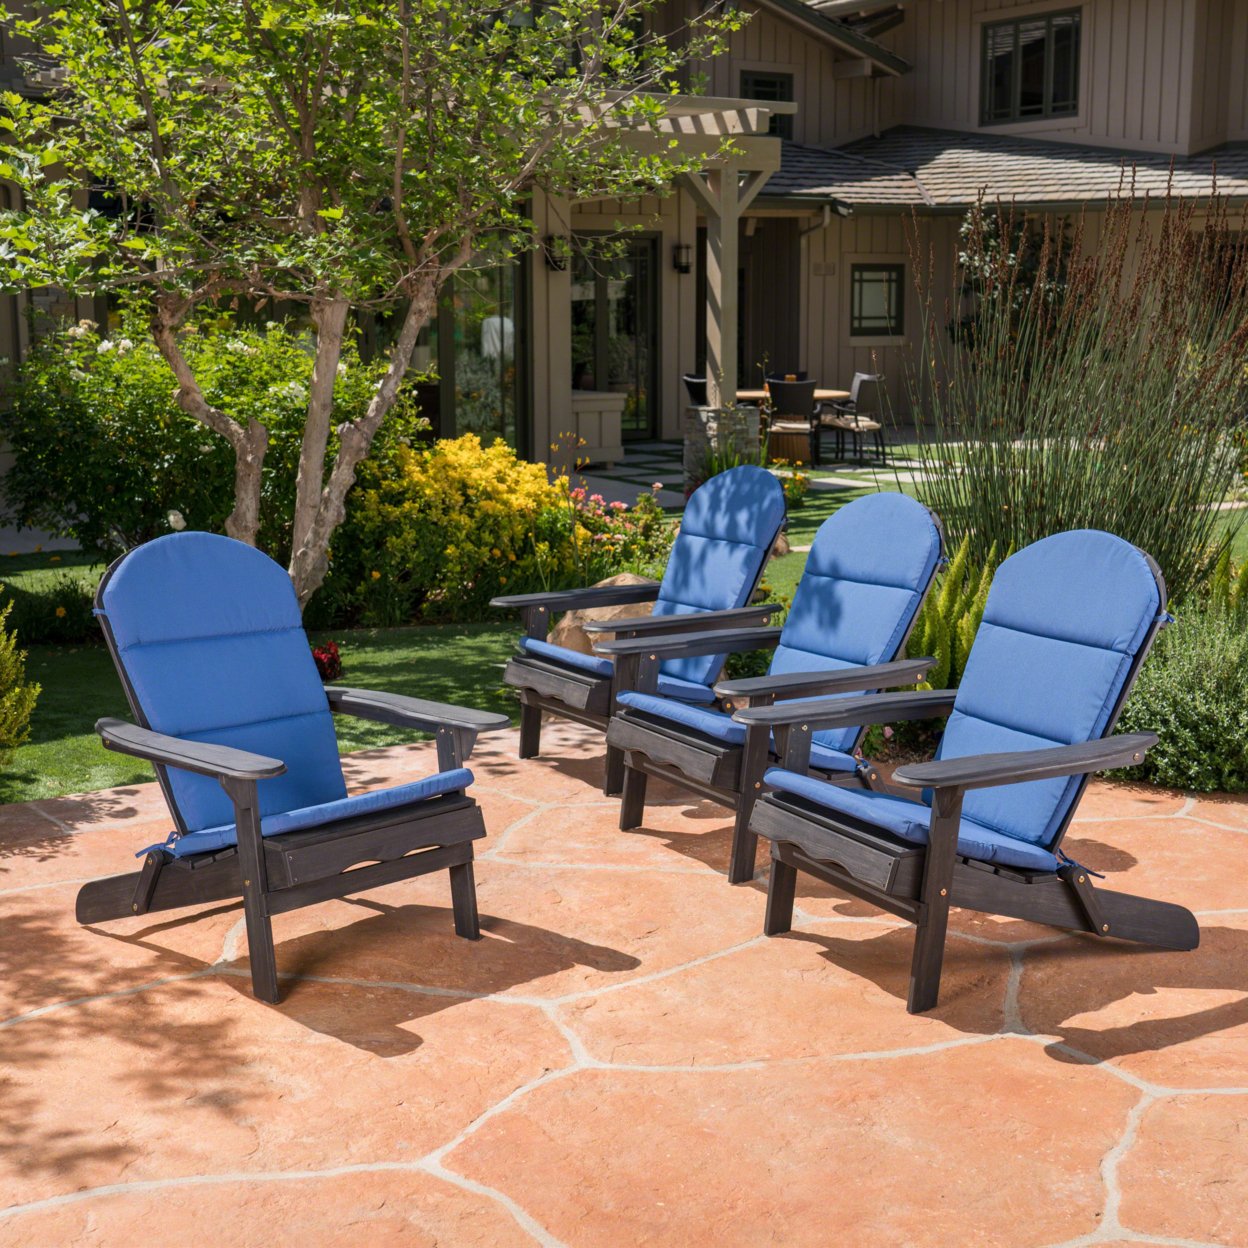 Nelie Outdoor Acacia Wood Adirondack Chairs With Cushions - Navy Blue, Set Of 4